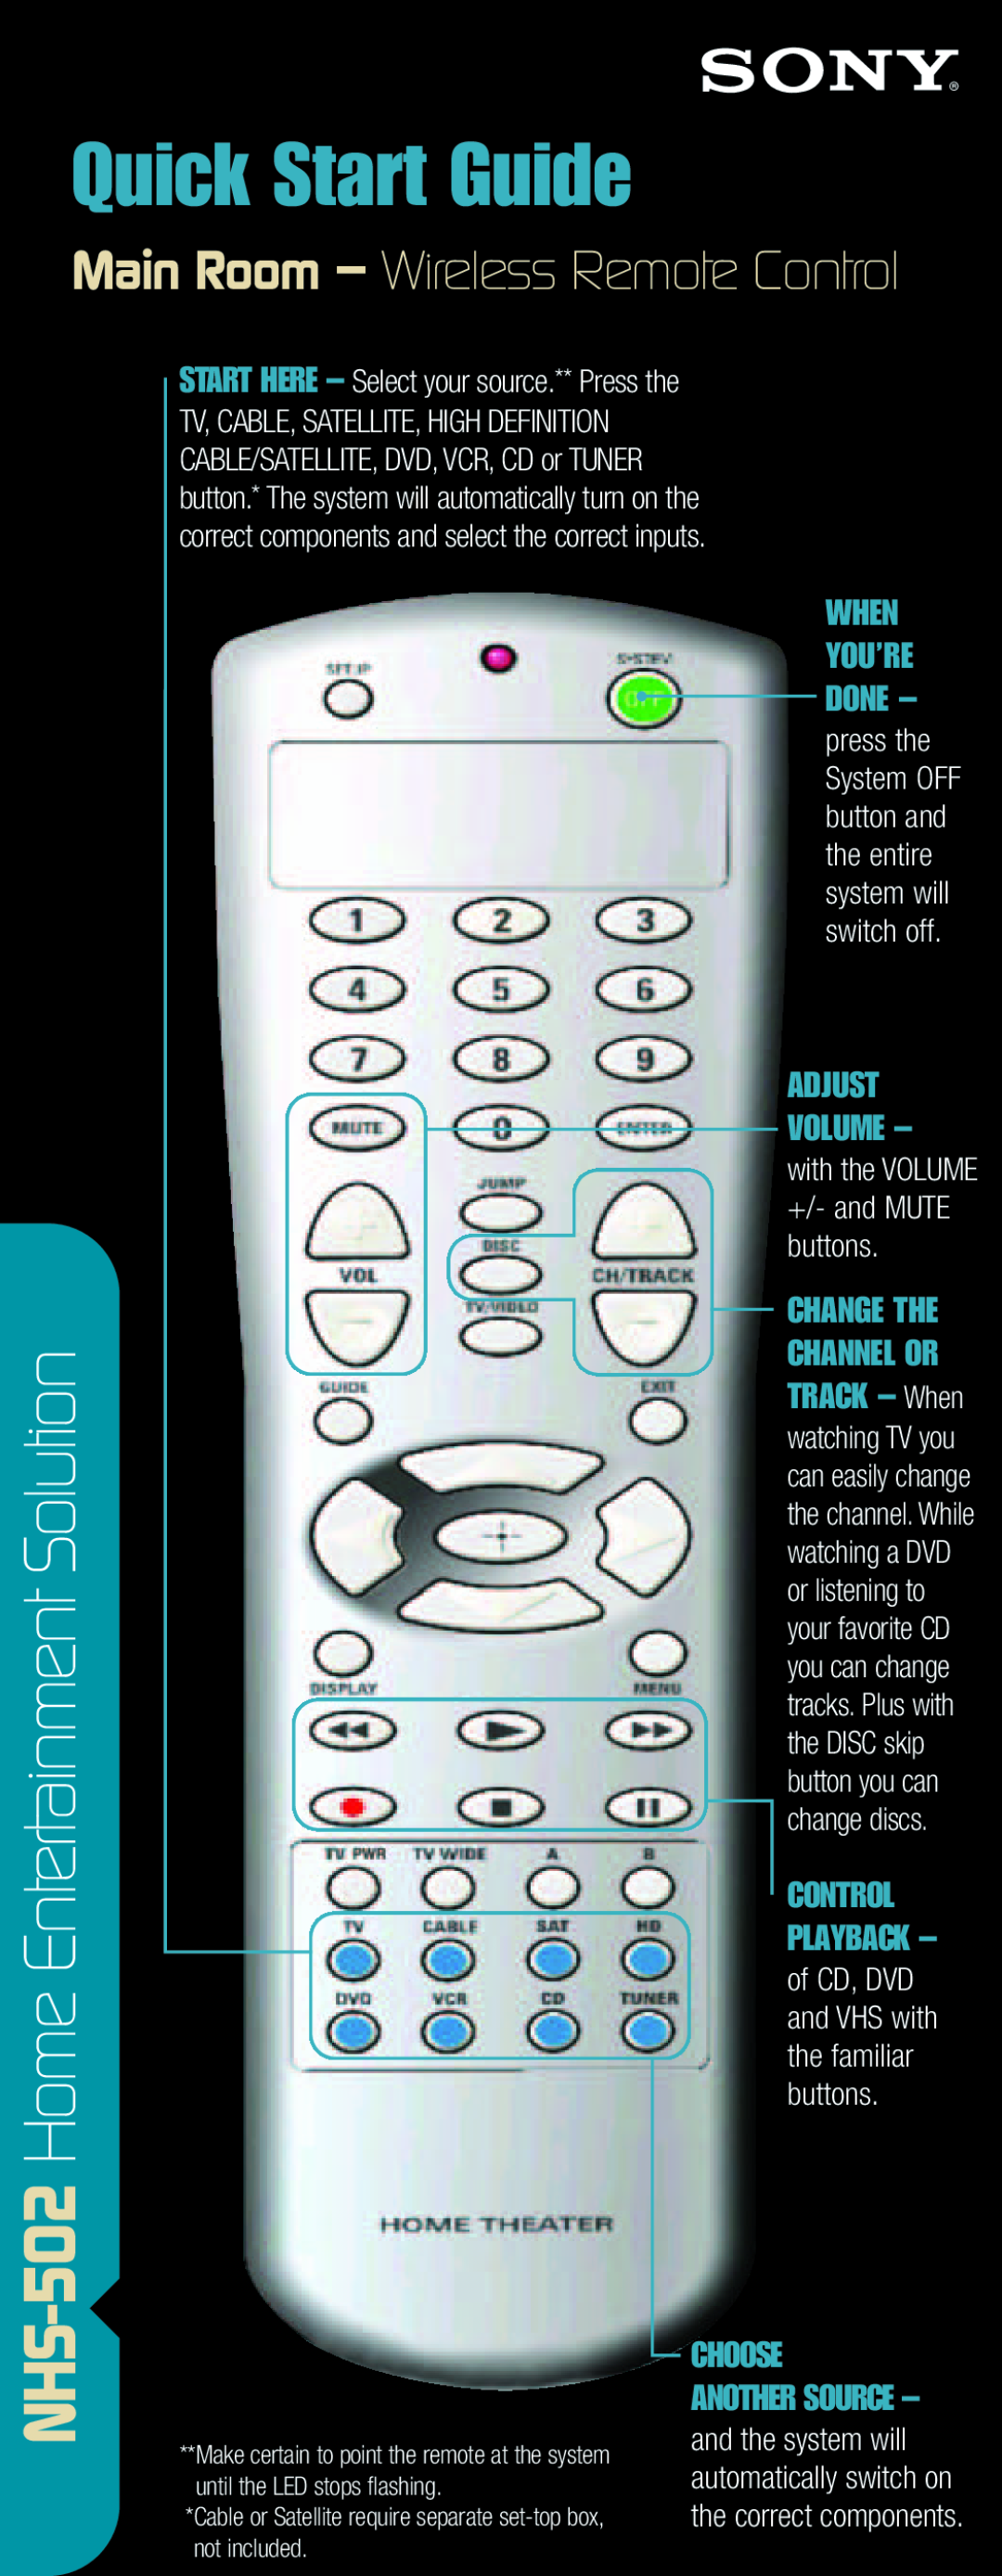 Sony quick start Quick Start Guide, NHS-502 Home Entertainment Solution, When You’Re Done, Adjust Volume 